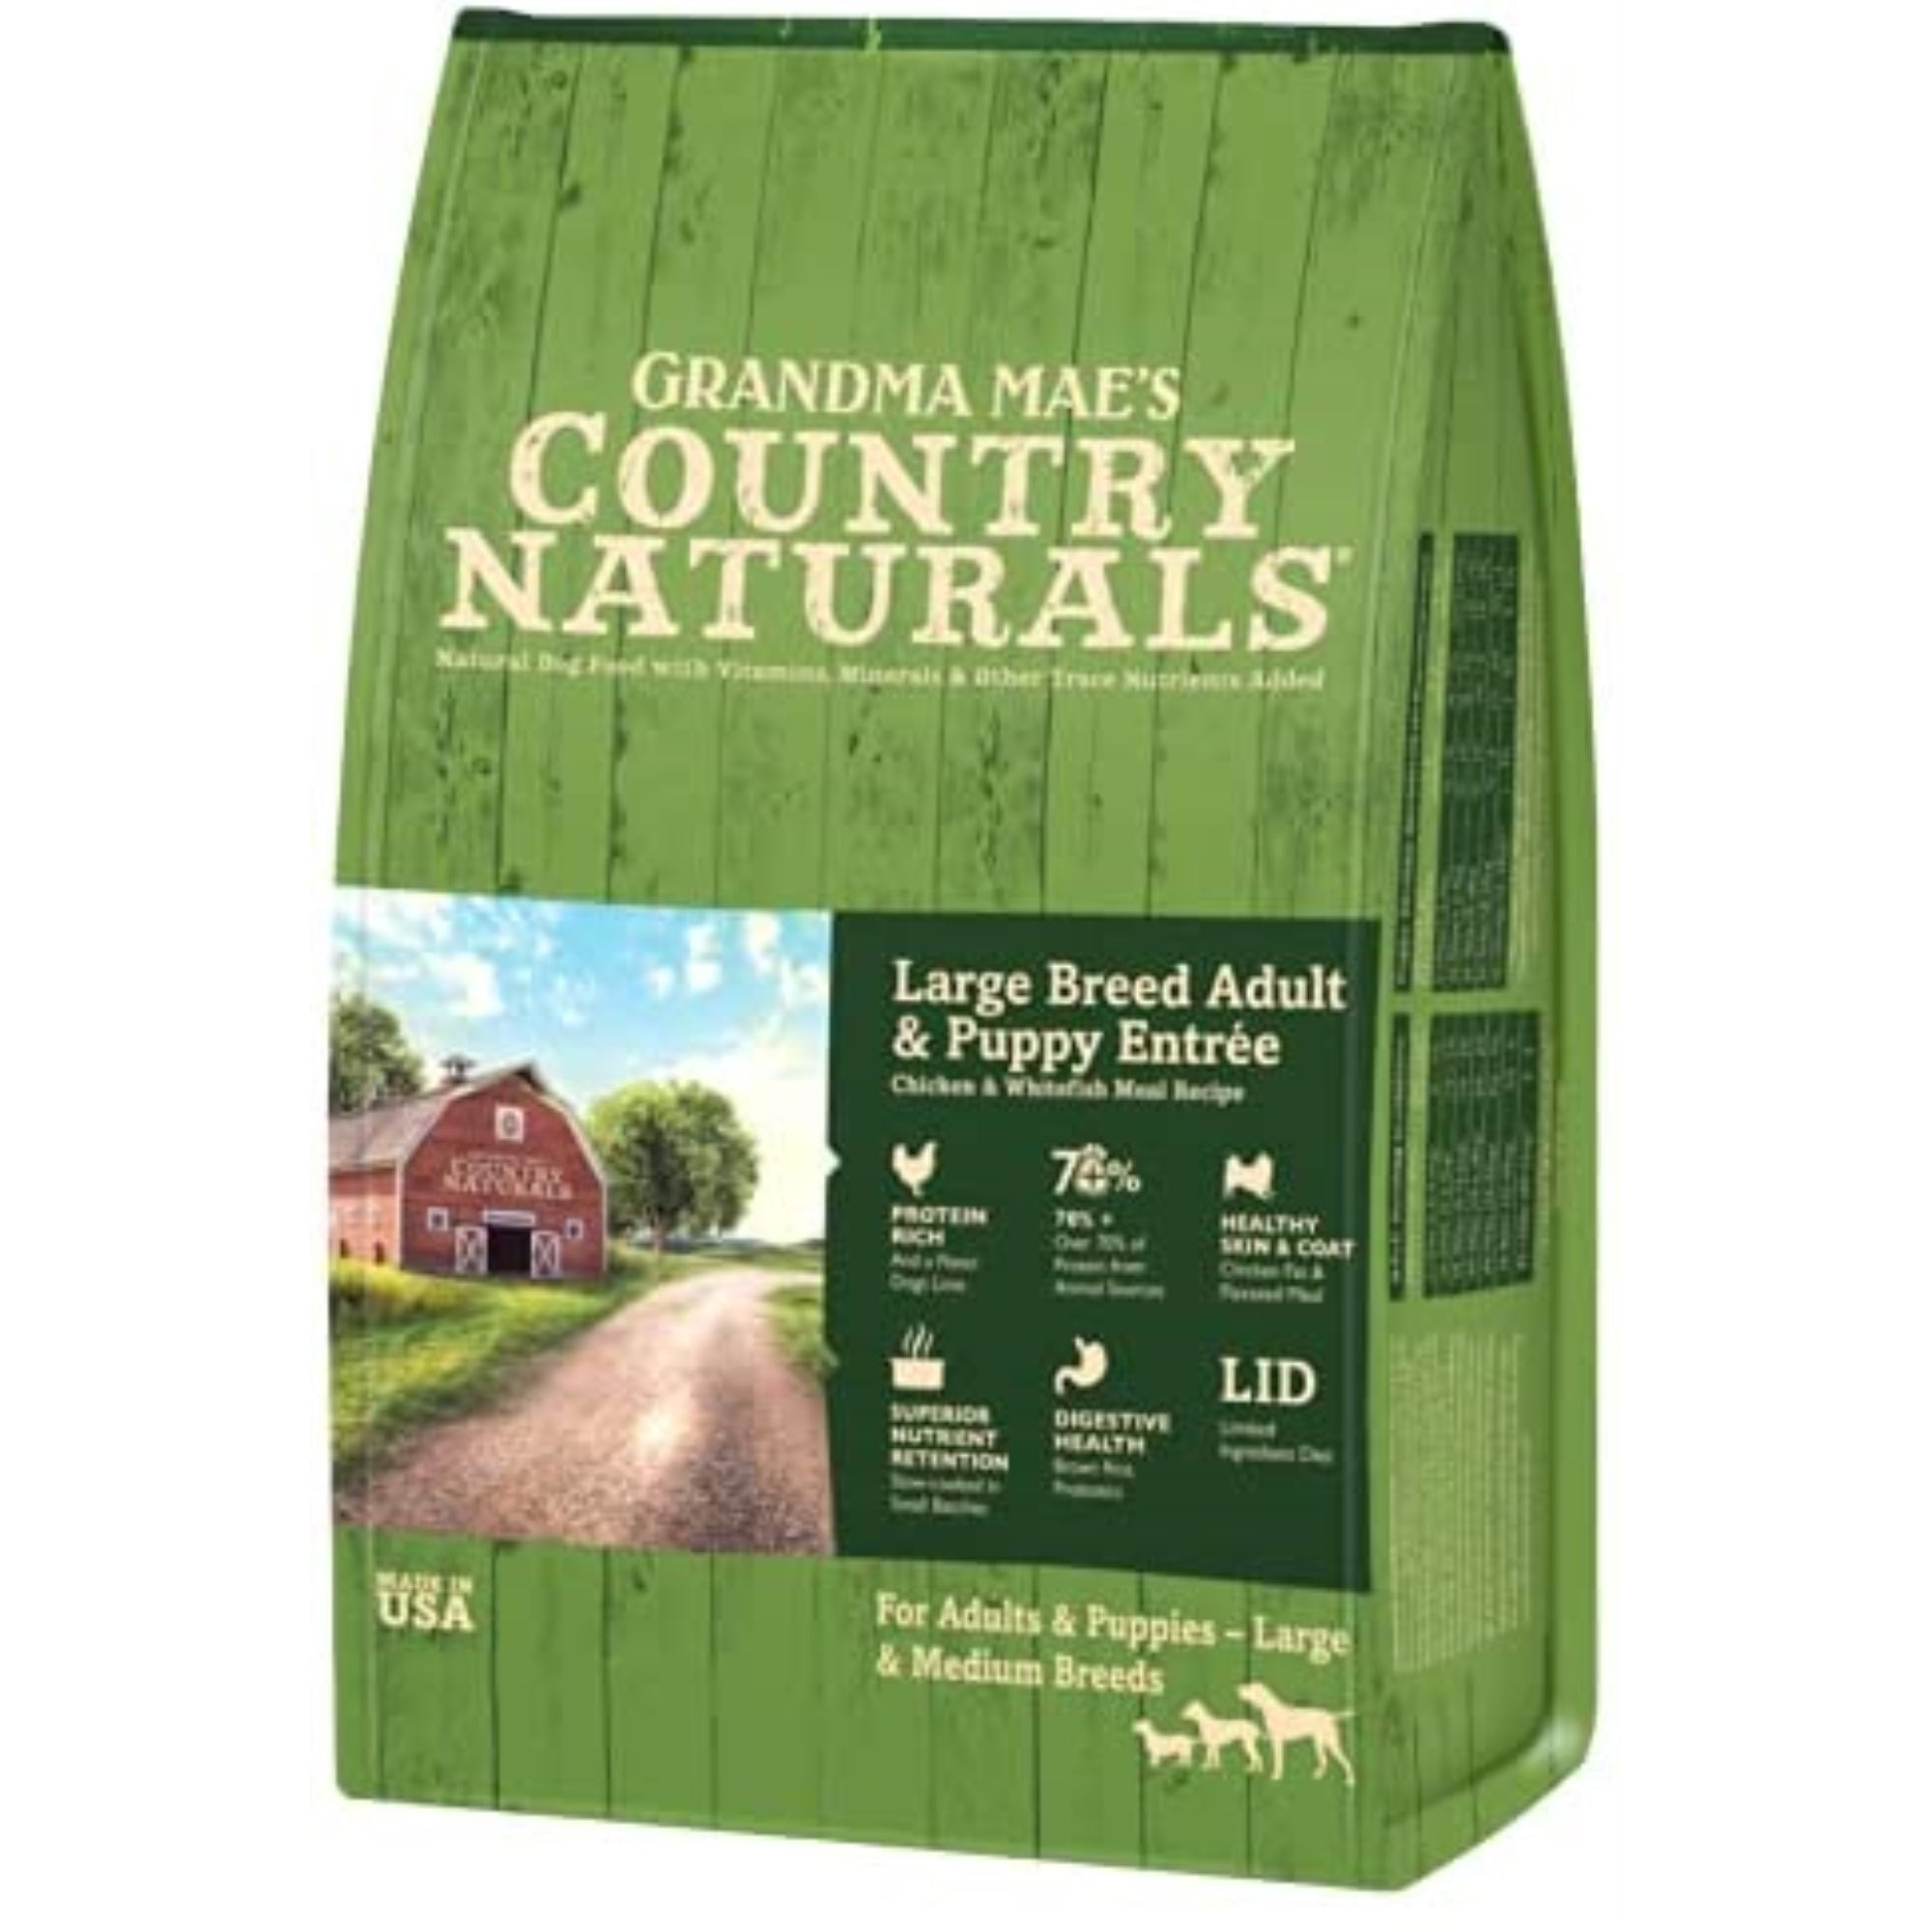 Grandma Mae’s Country Naturals Large Breed Adult & Puppy Entree Dog Food, 14 LB